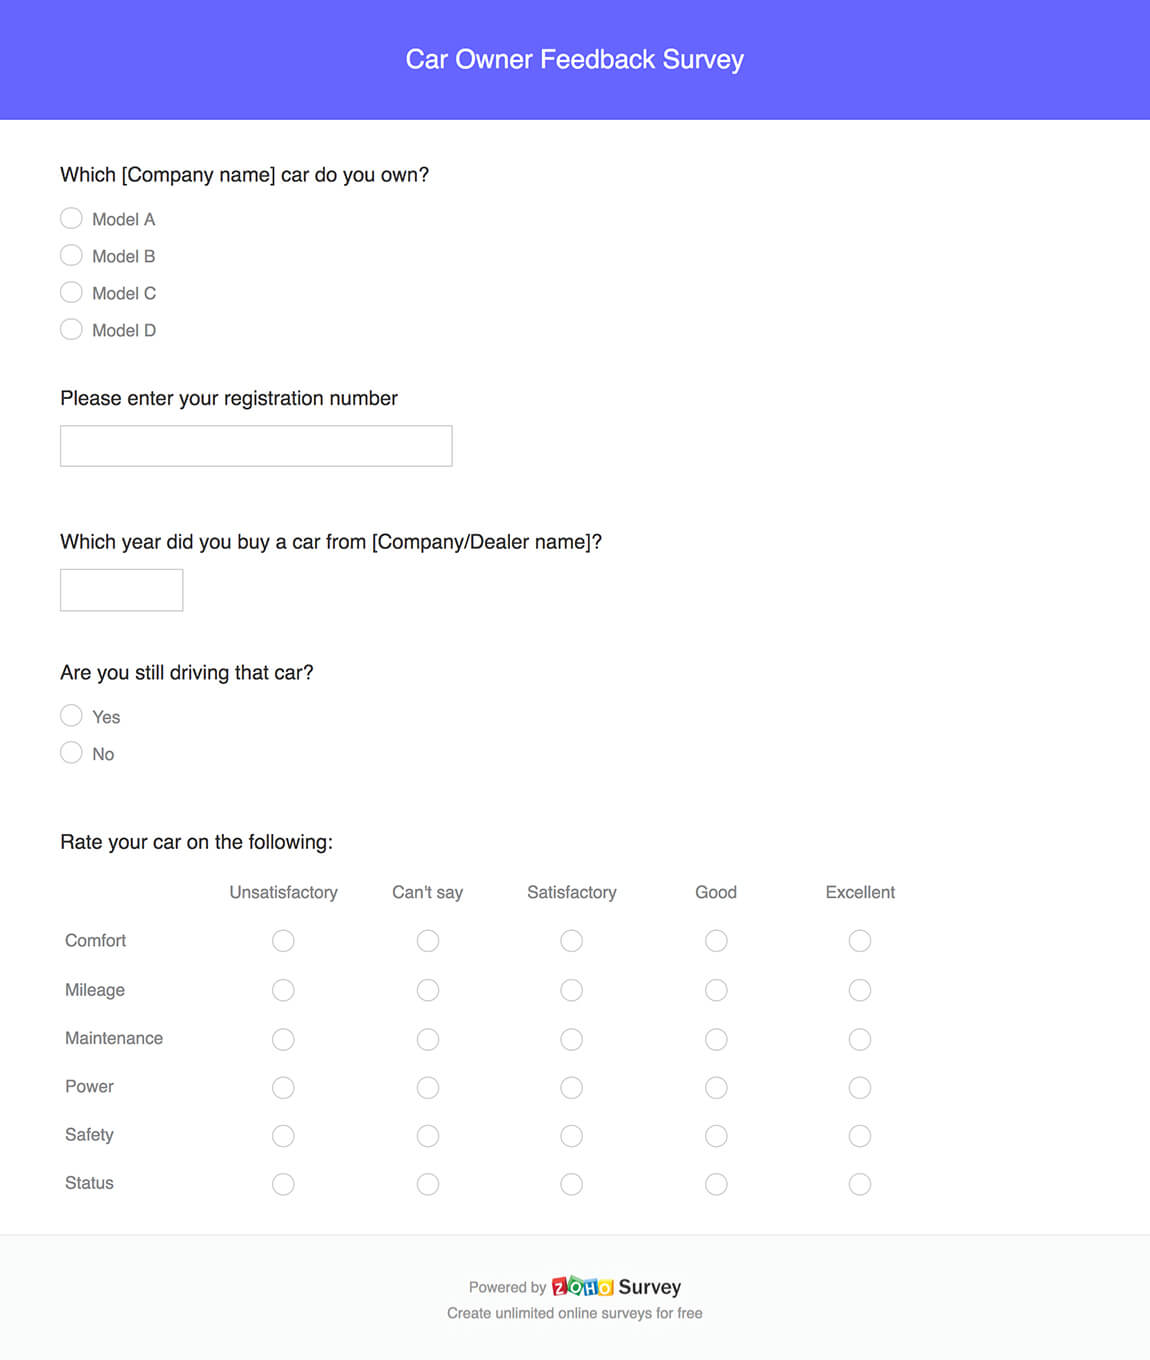 Car owner feedback survey questionnaire template